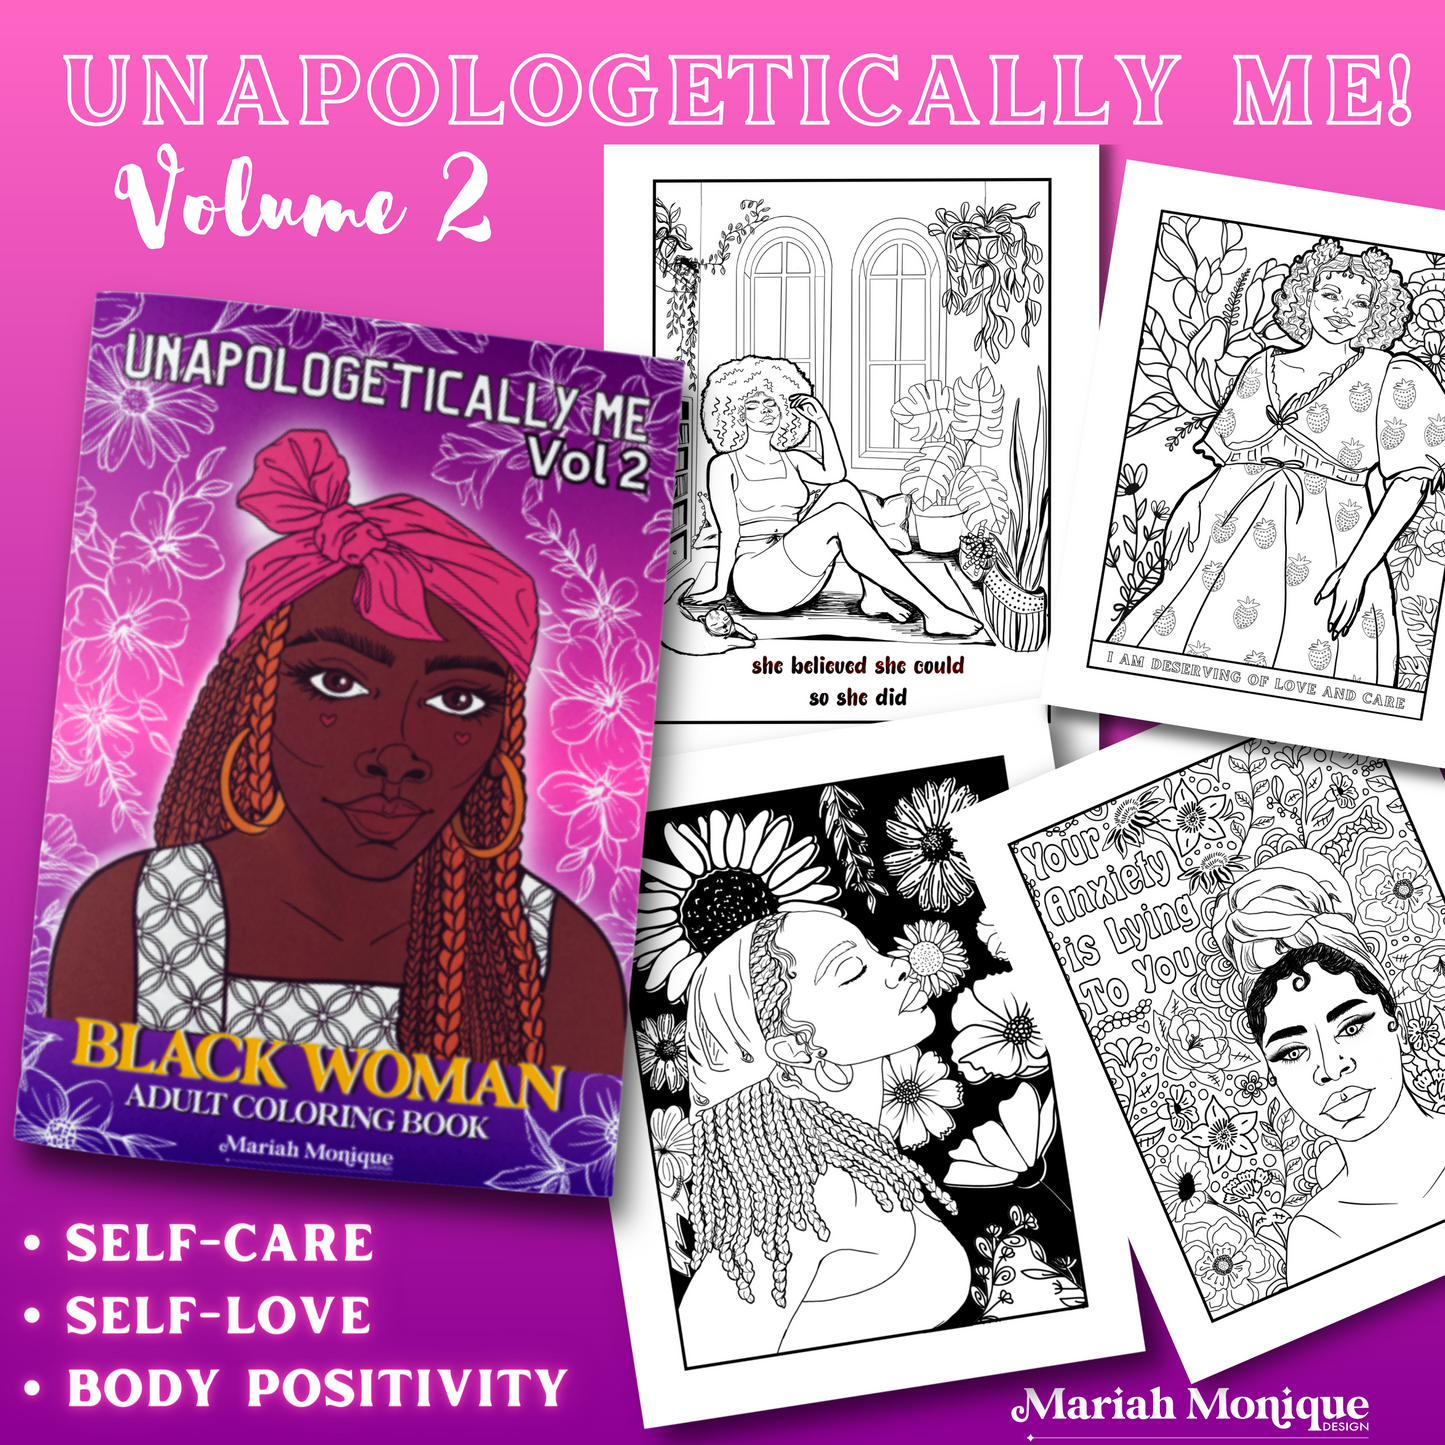 Unapologetically Me! Volume 2 Black Woman Adult Coloring Book